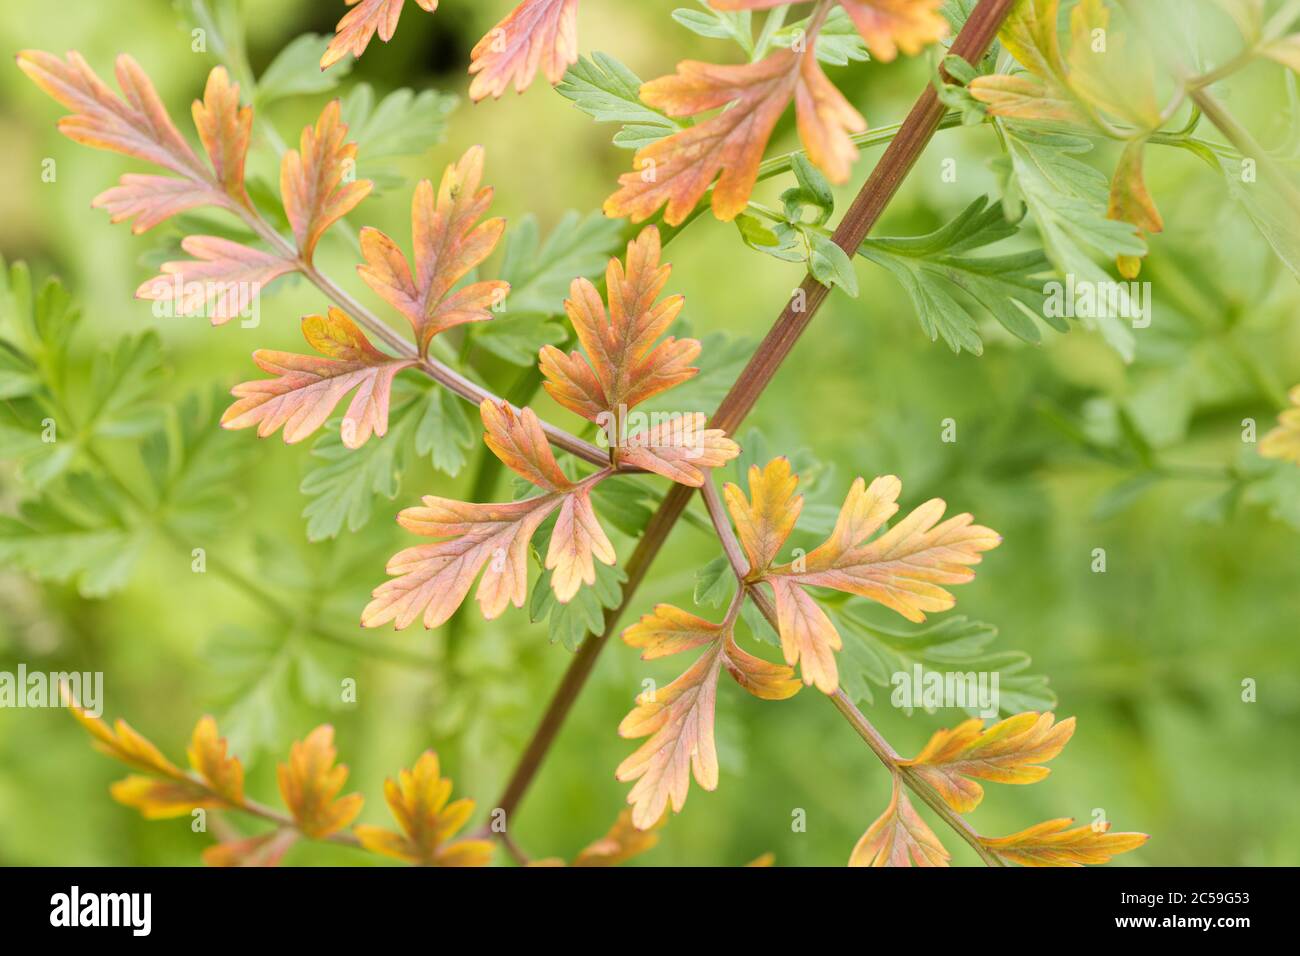 Yellow-orange dying leaves of Hemlock Water-Dropwort / Oenanthe crocata in June-July. One of the UK's most poisonous plants. Dying plant leaves. Stock Photo